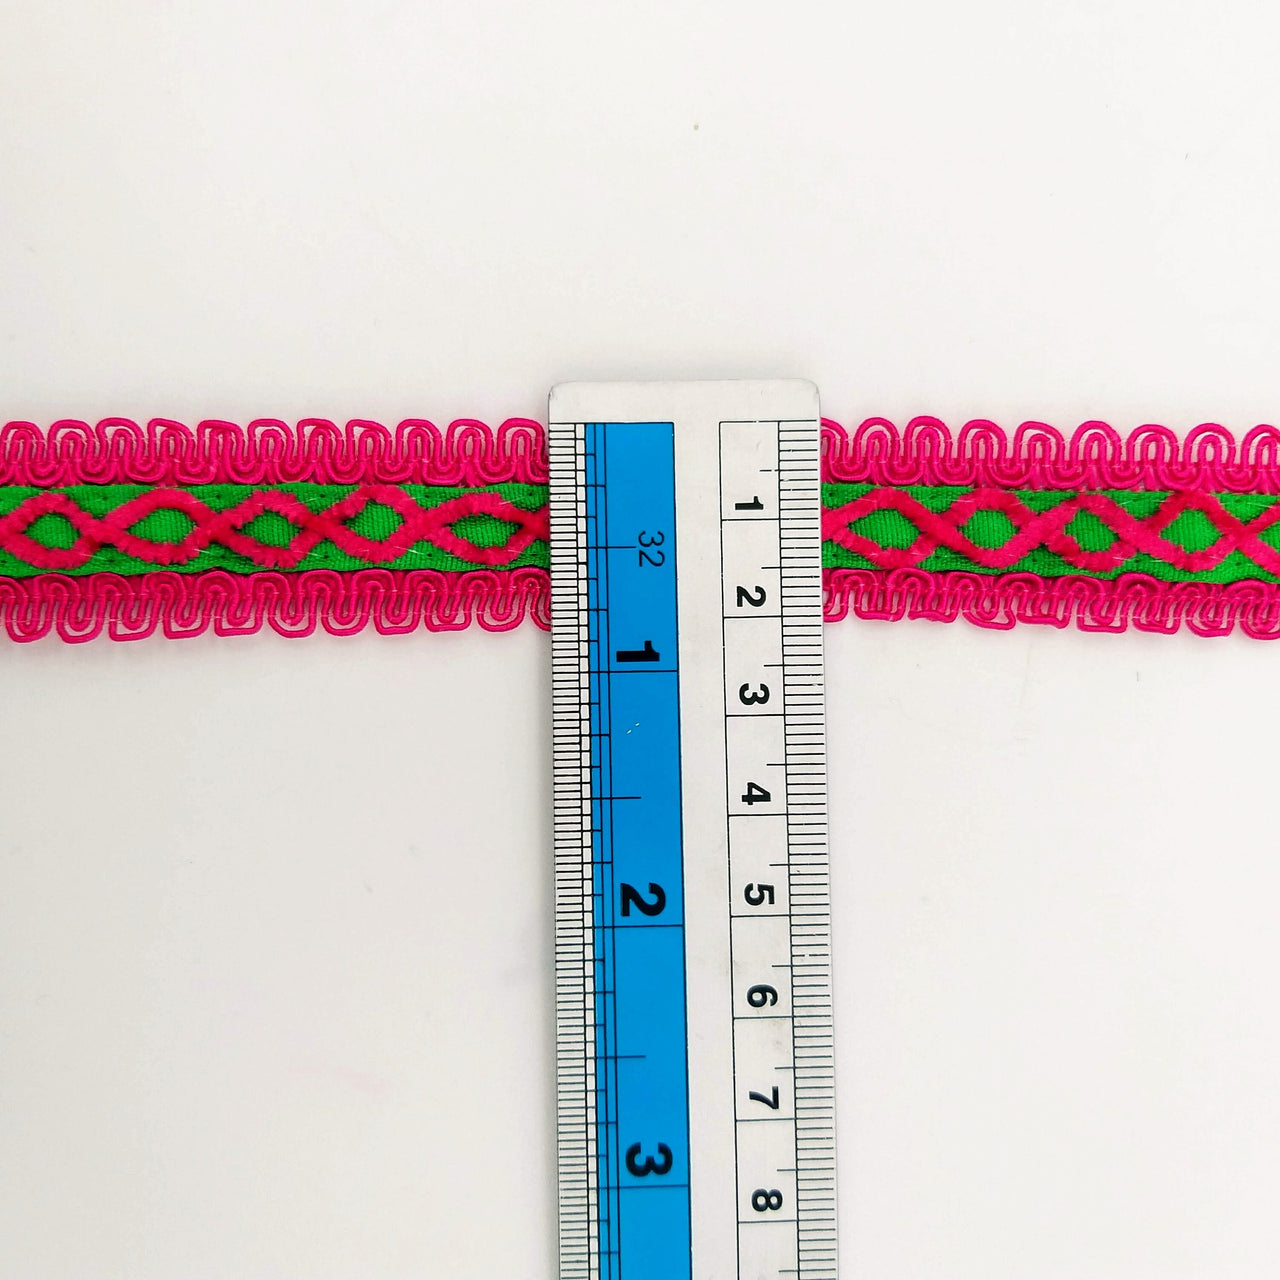 Green Cotton Fabric Lace Trim with Pink Thread Embroidery, Trim By 3 Yards, Craft Decorative Ribbon